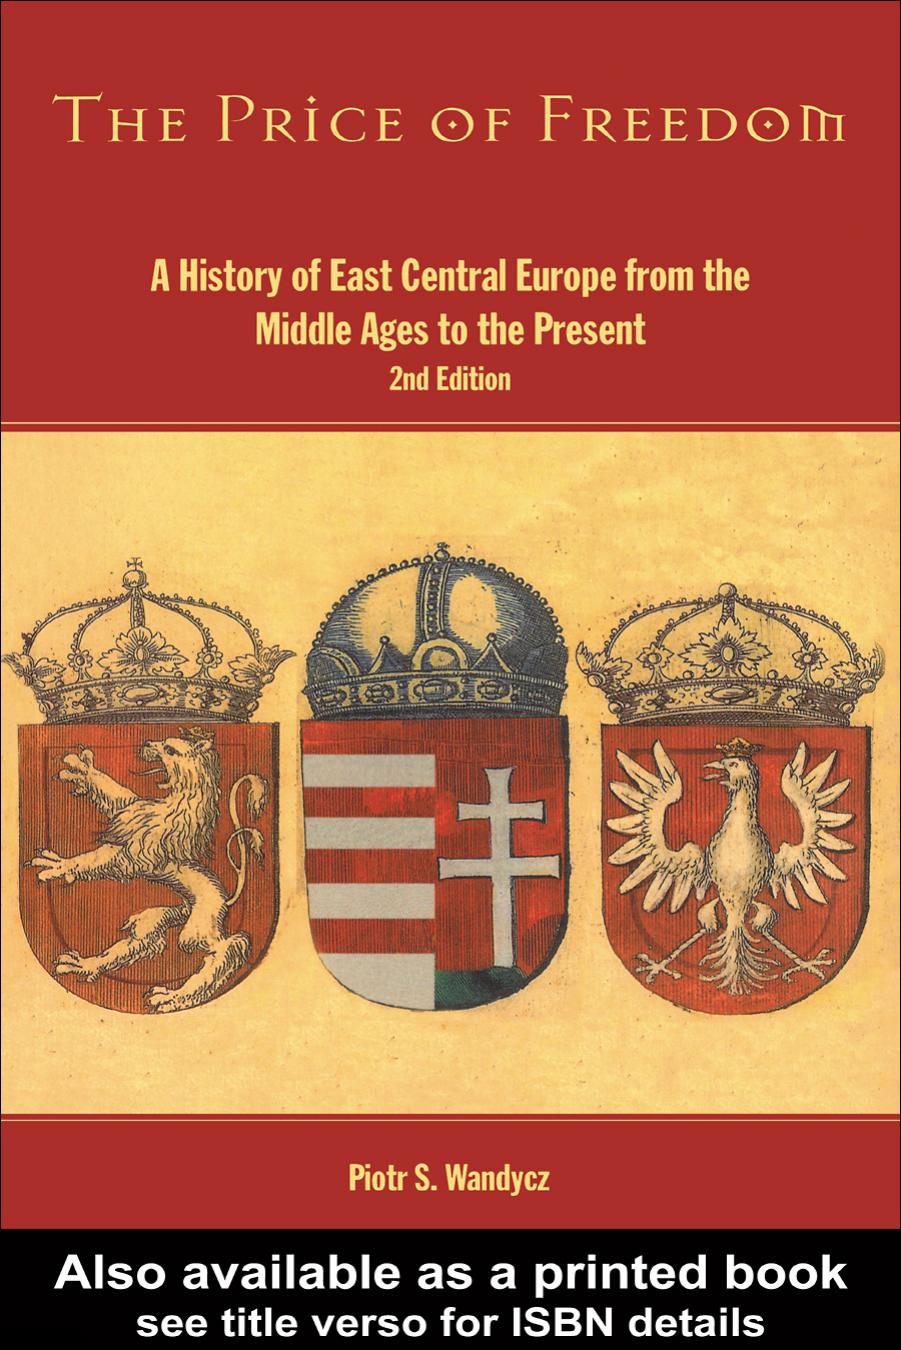 The Price of Freedom: A History of East Central Europe From the Middle Ages to the Present